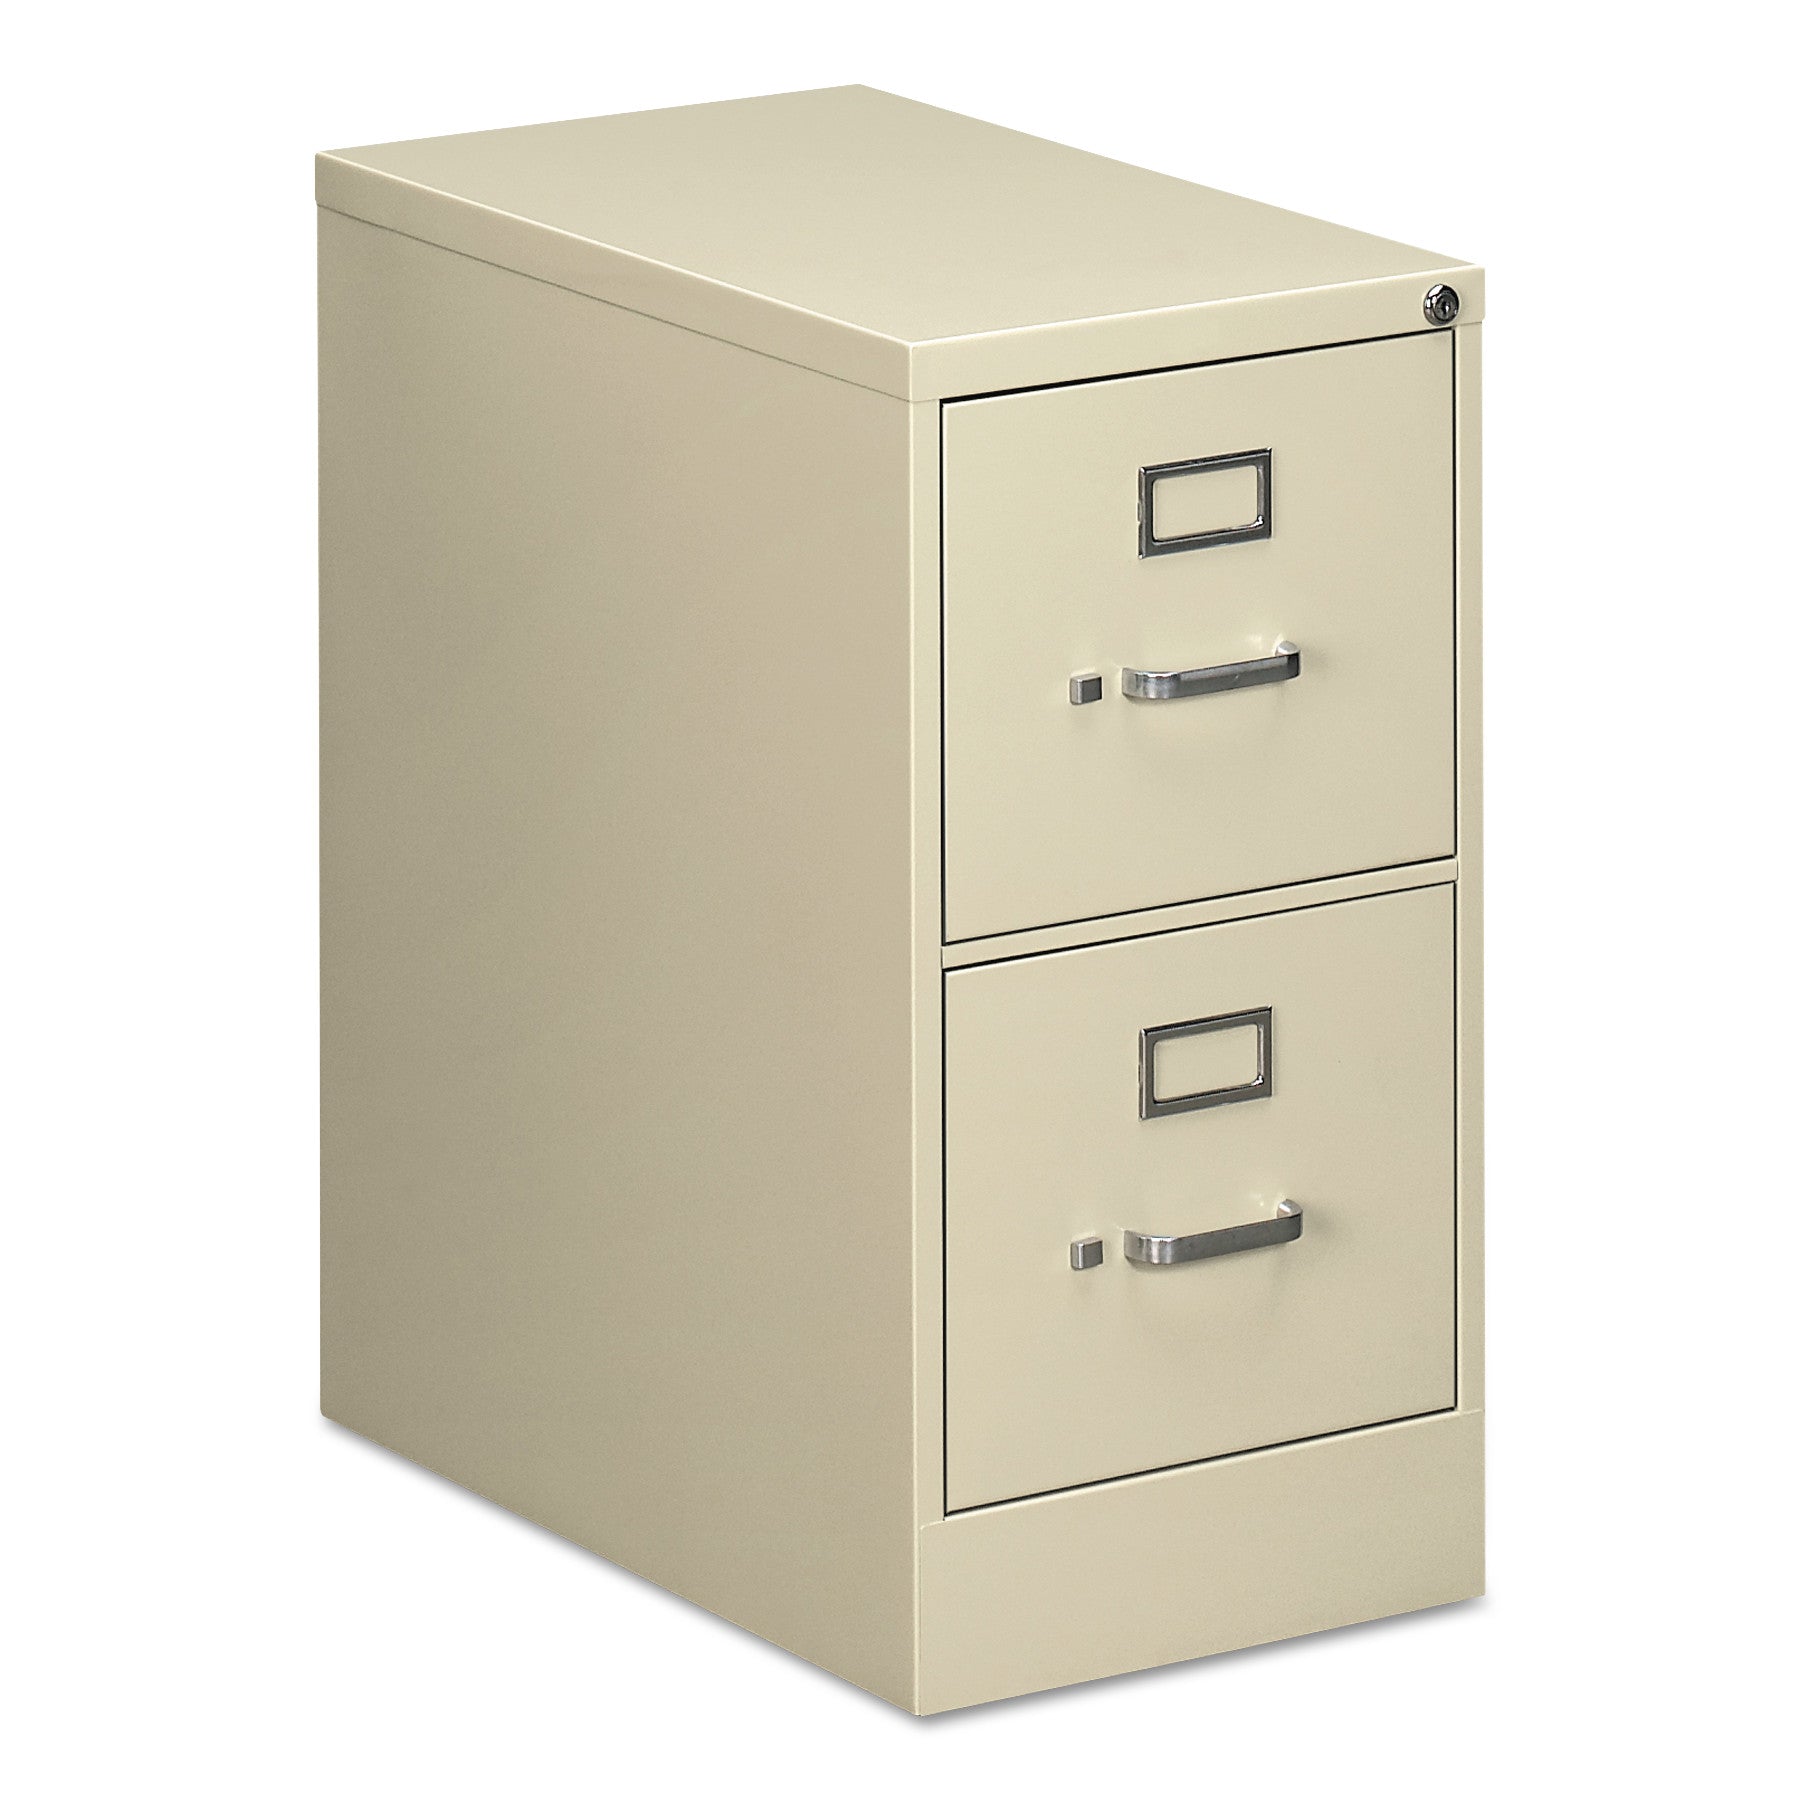 two-drawer-economy-vertical-file-2-letter-size-file-drawers-putty-15-x-25-x-2838_alehvf1529py - 1